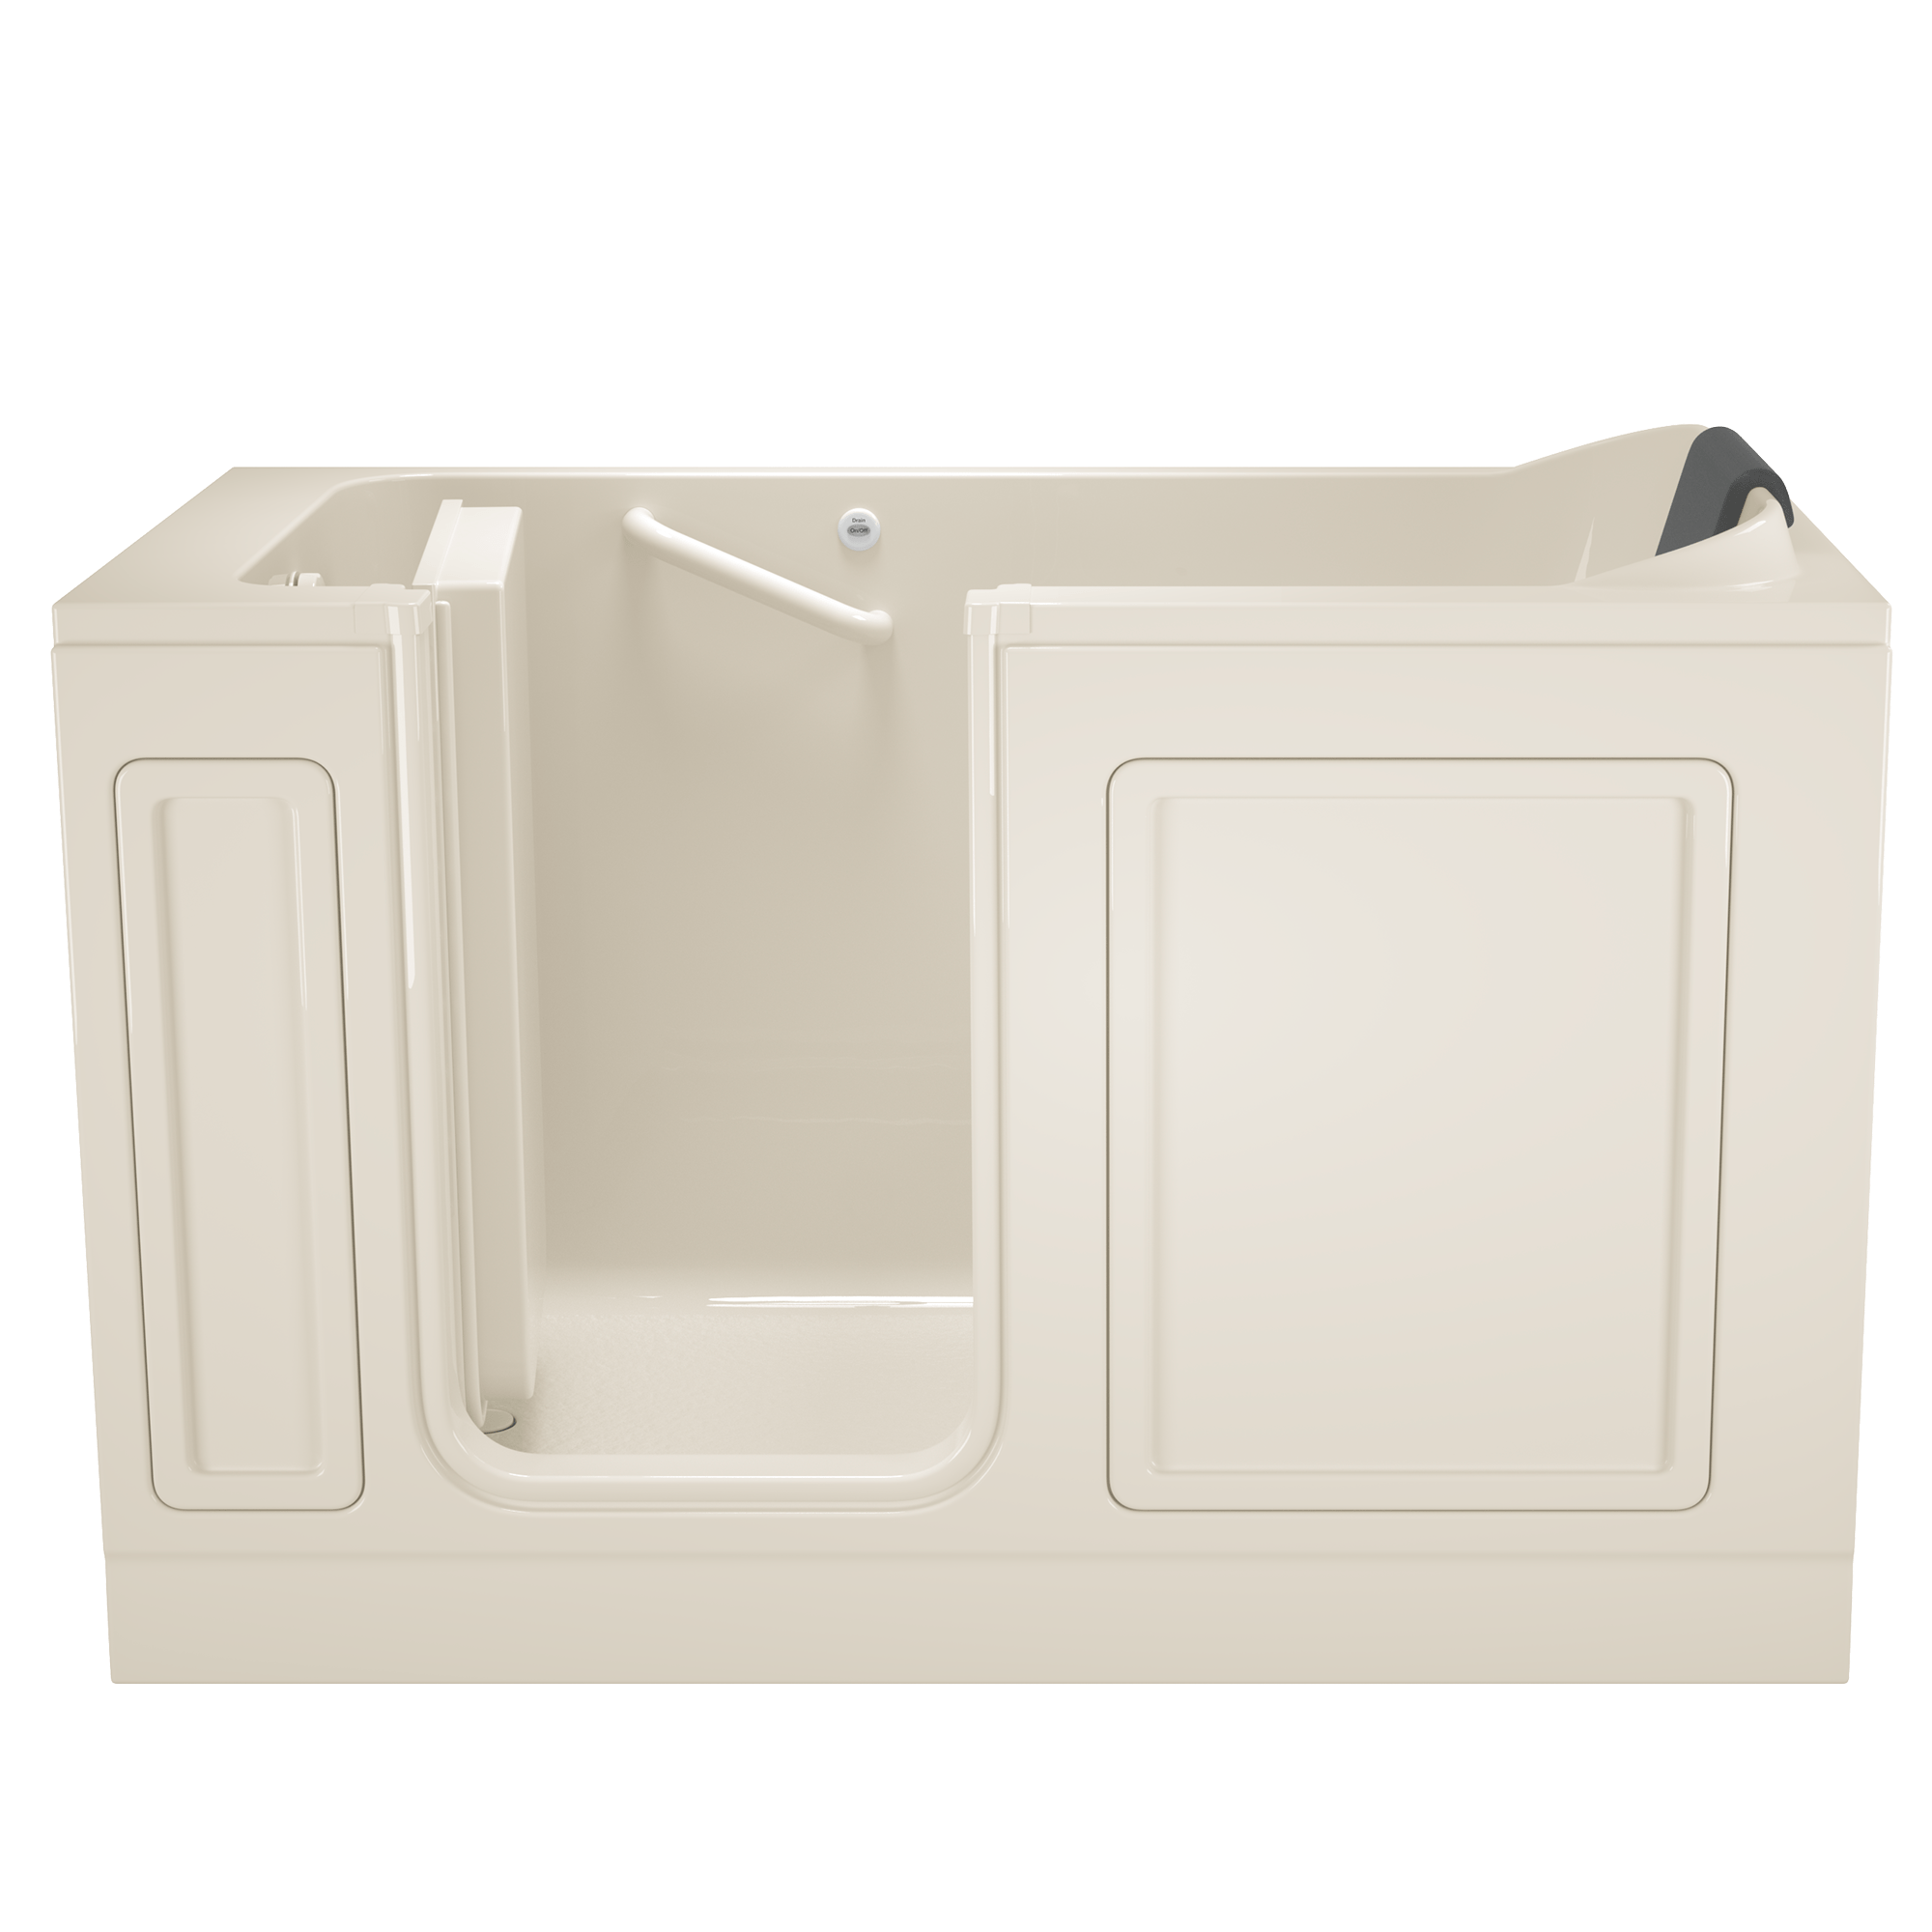 Acrylic Luxury Series 32 x 60 -Inch Walk-in Tub With Soaker System - Left-Hand Drain